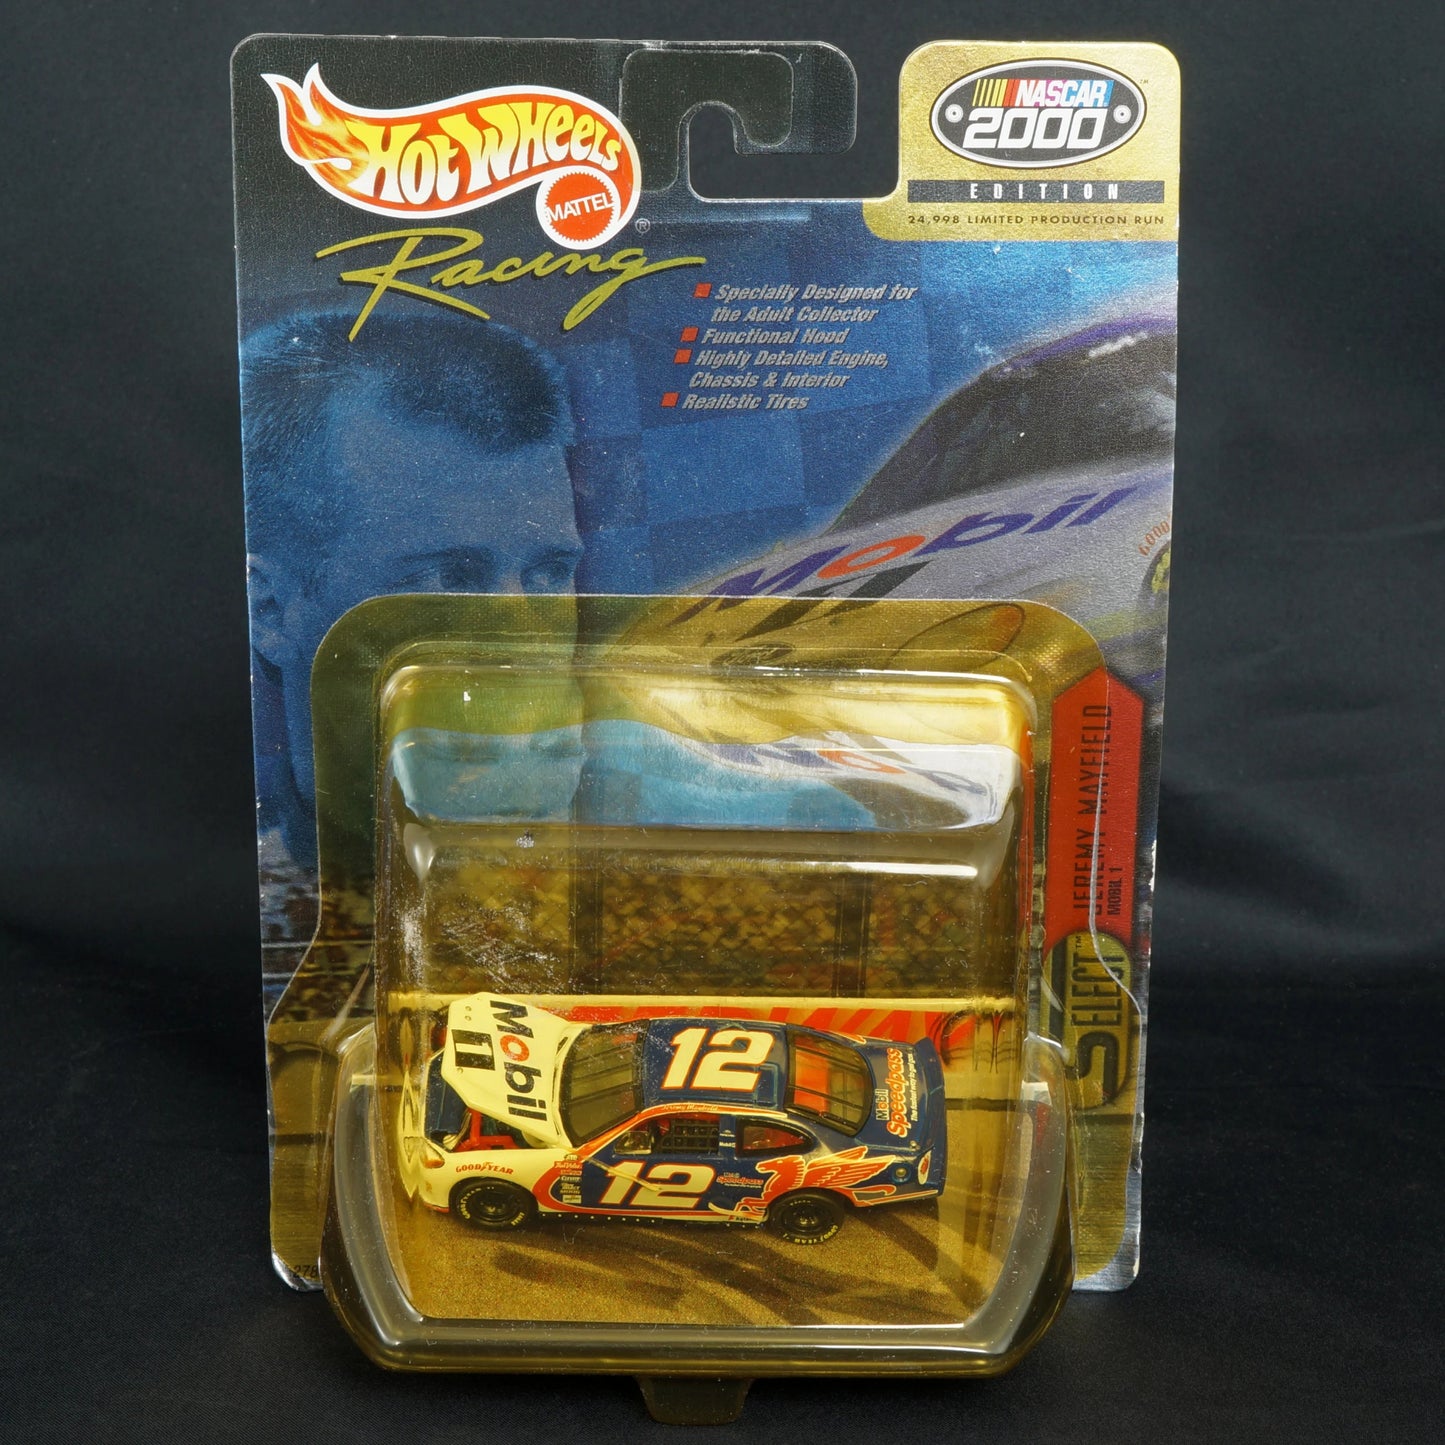 Mattel Hot Wheels Racing Nascar 2000 Edition Car #12 Ford Taurus Jeremy Mayfield Mobil Oil – NIB - Bear and Raven Antiques